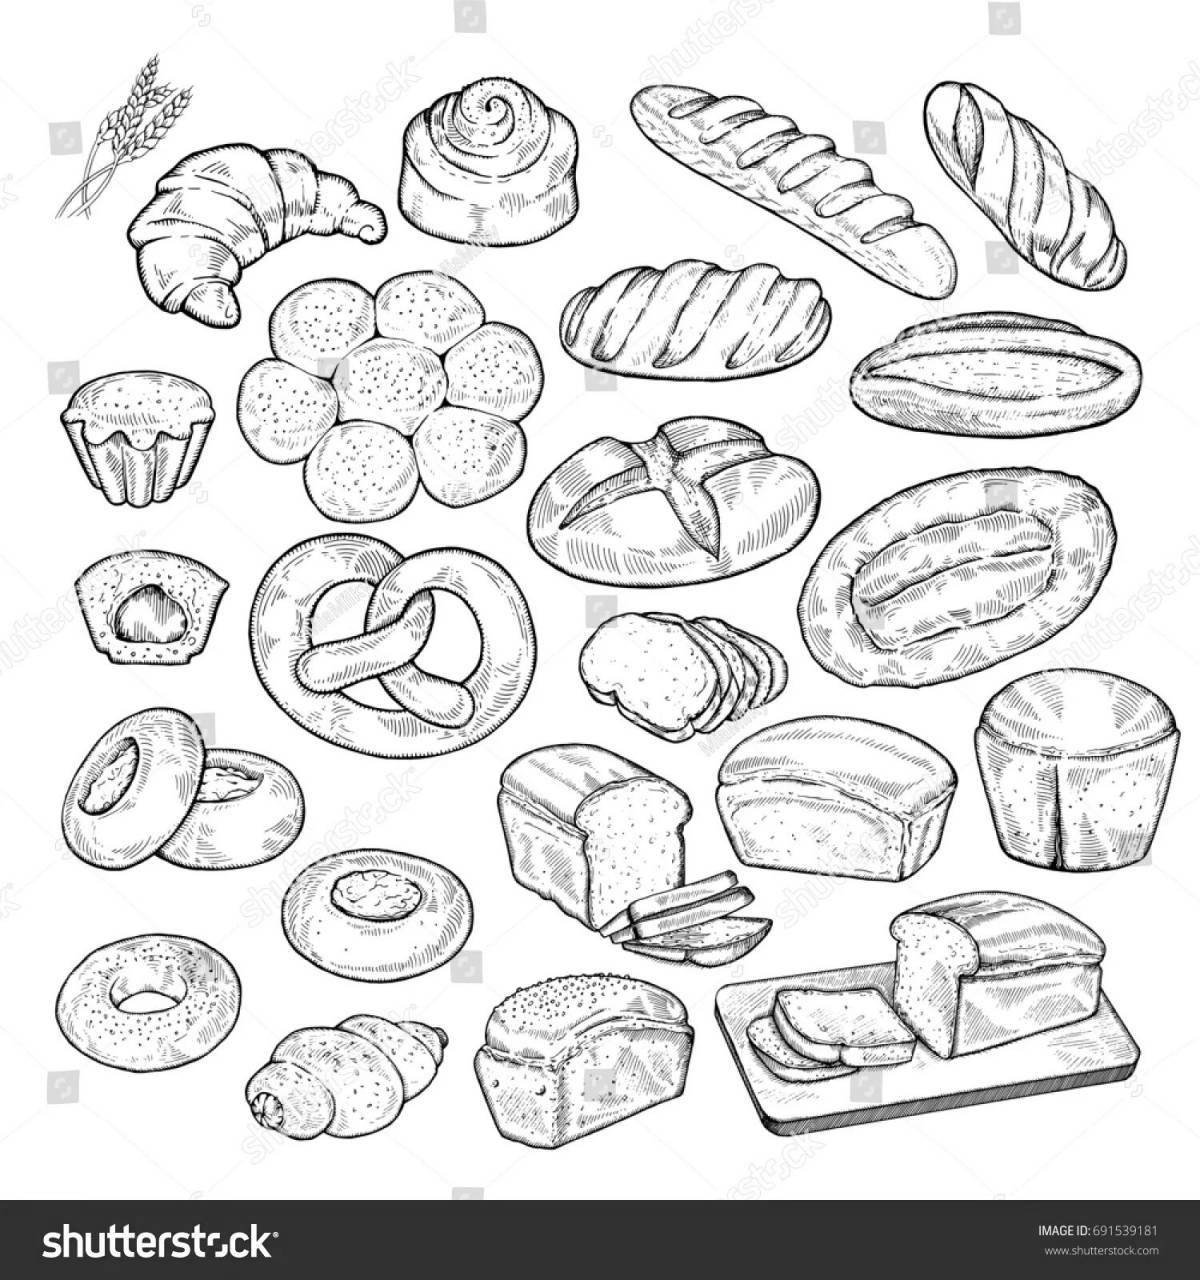 Delicious baked goods coloring page